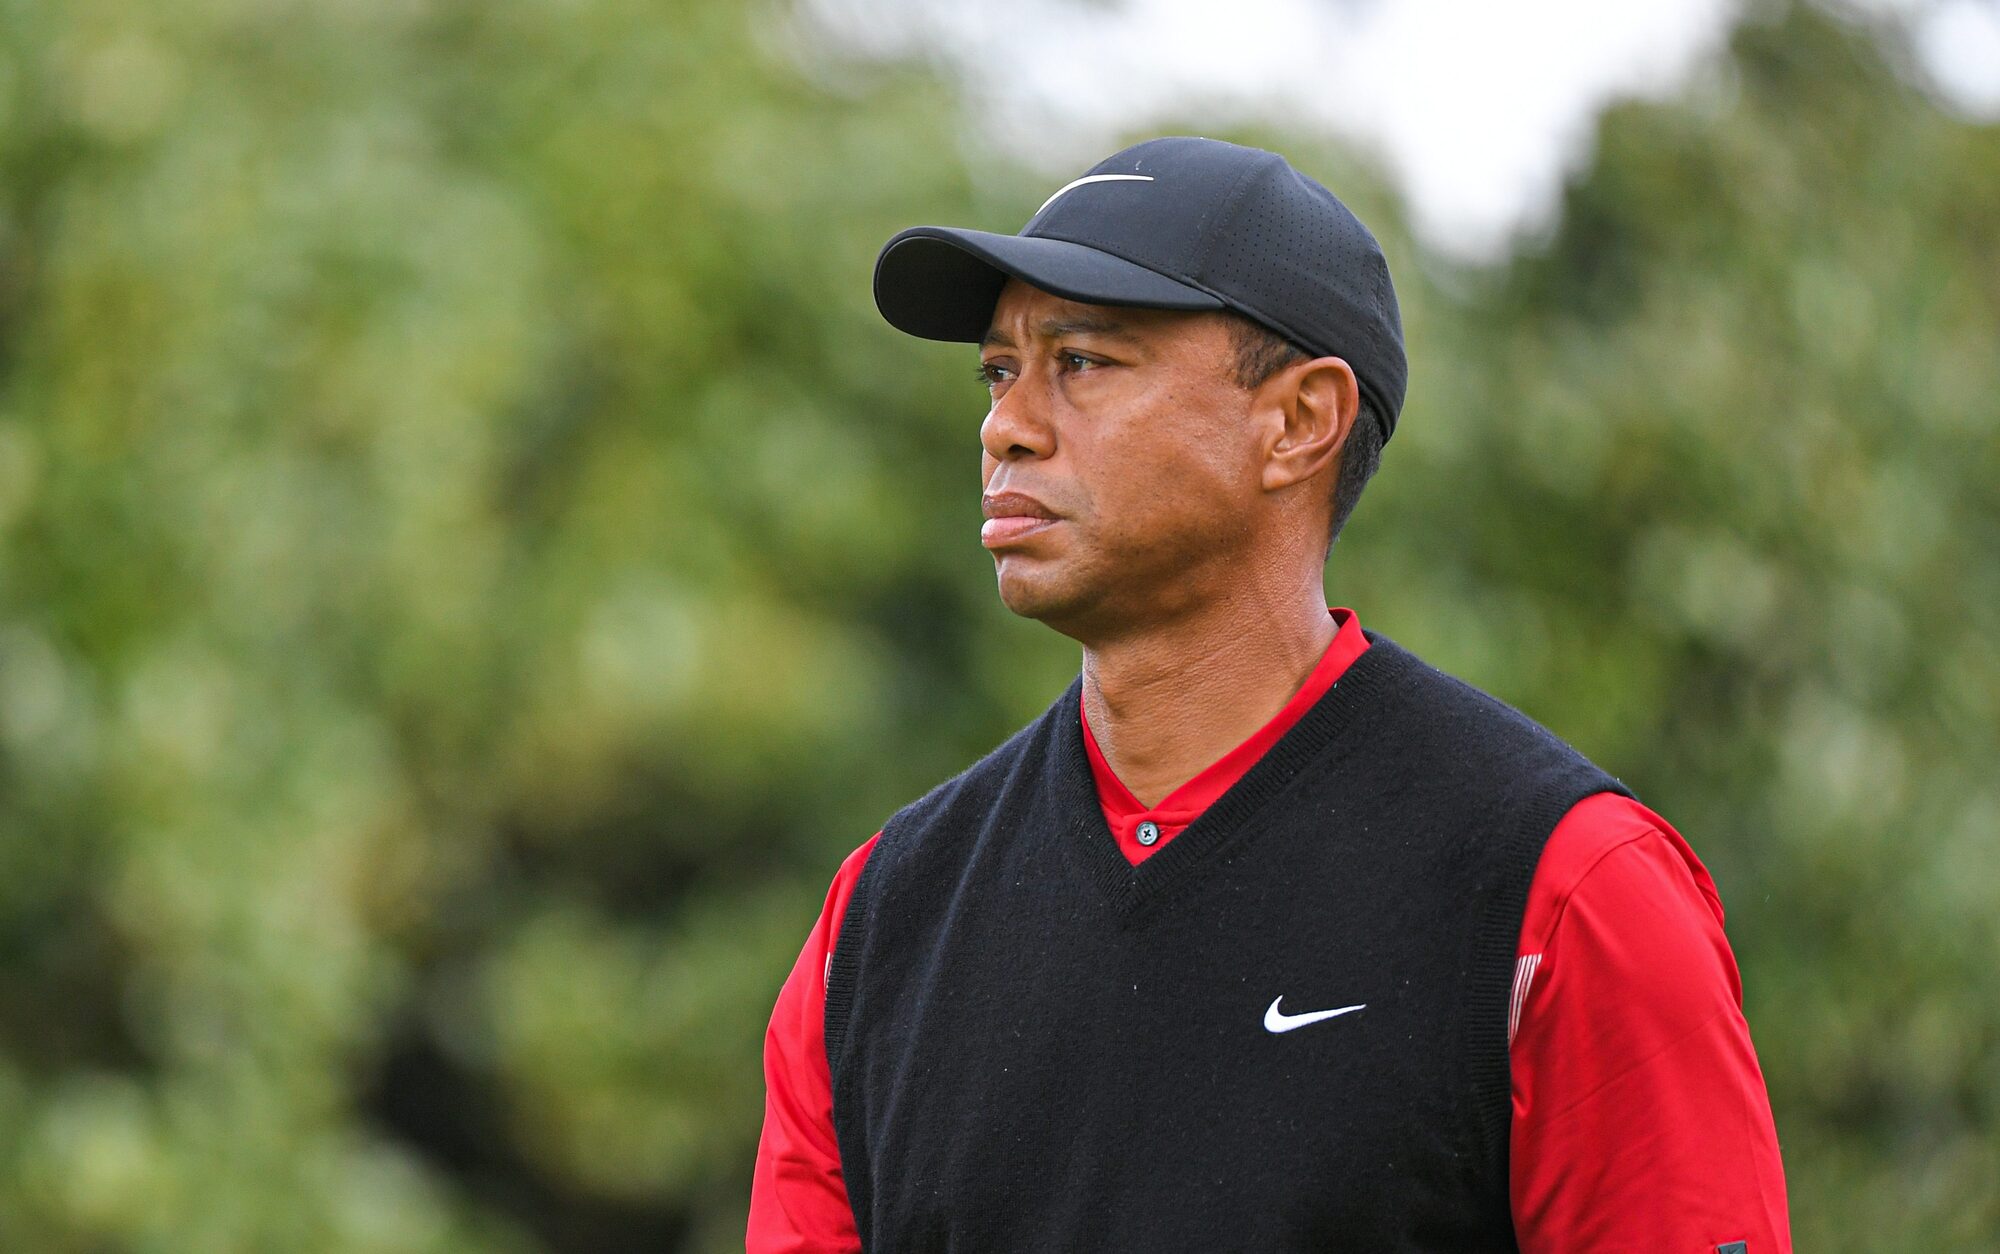 Tiger Woods news: Why are authorities hiding the truth about his ...